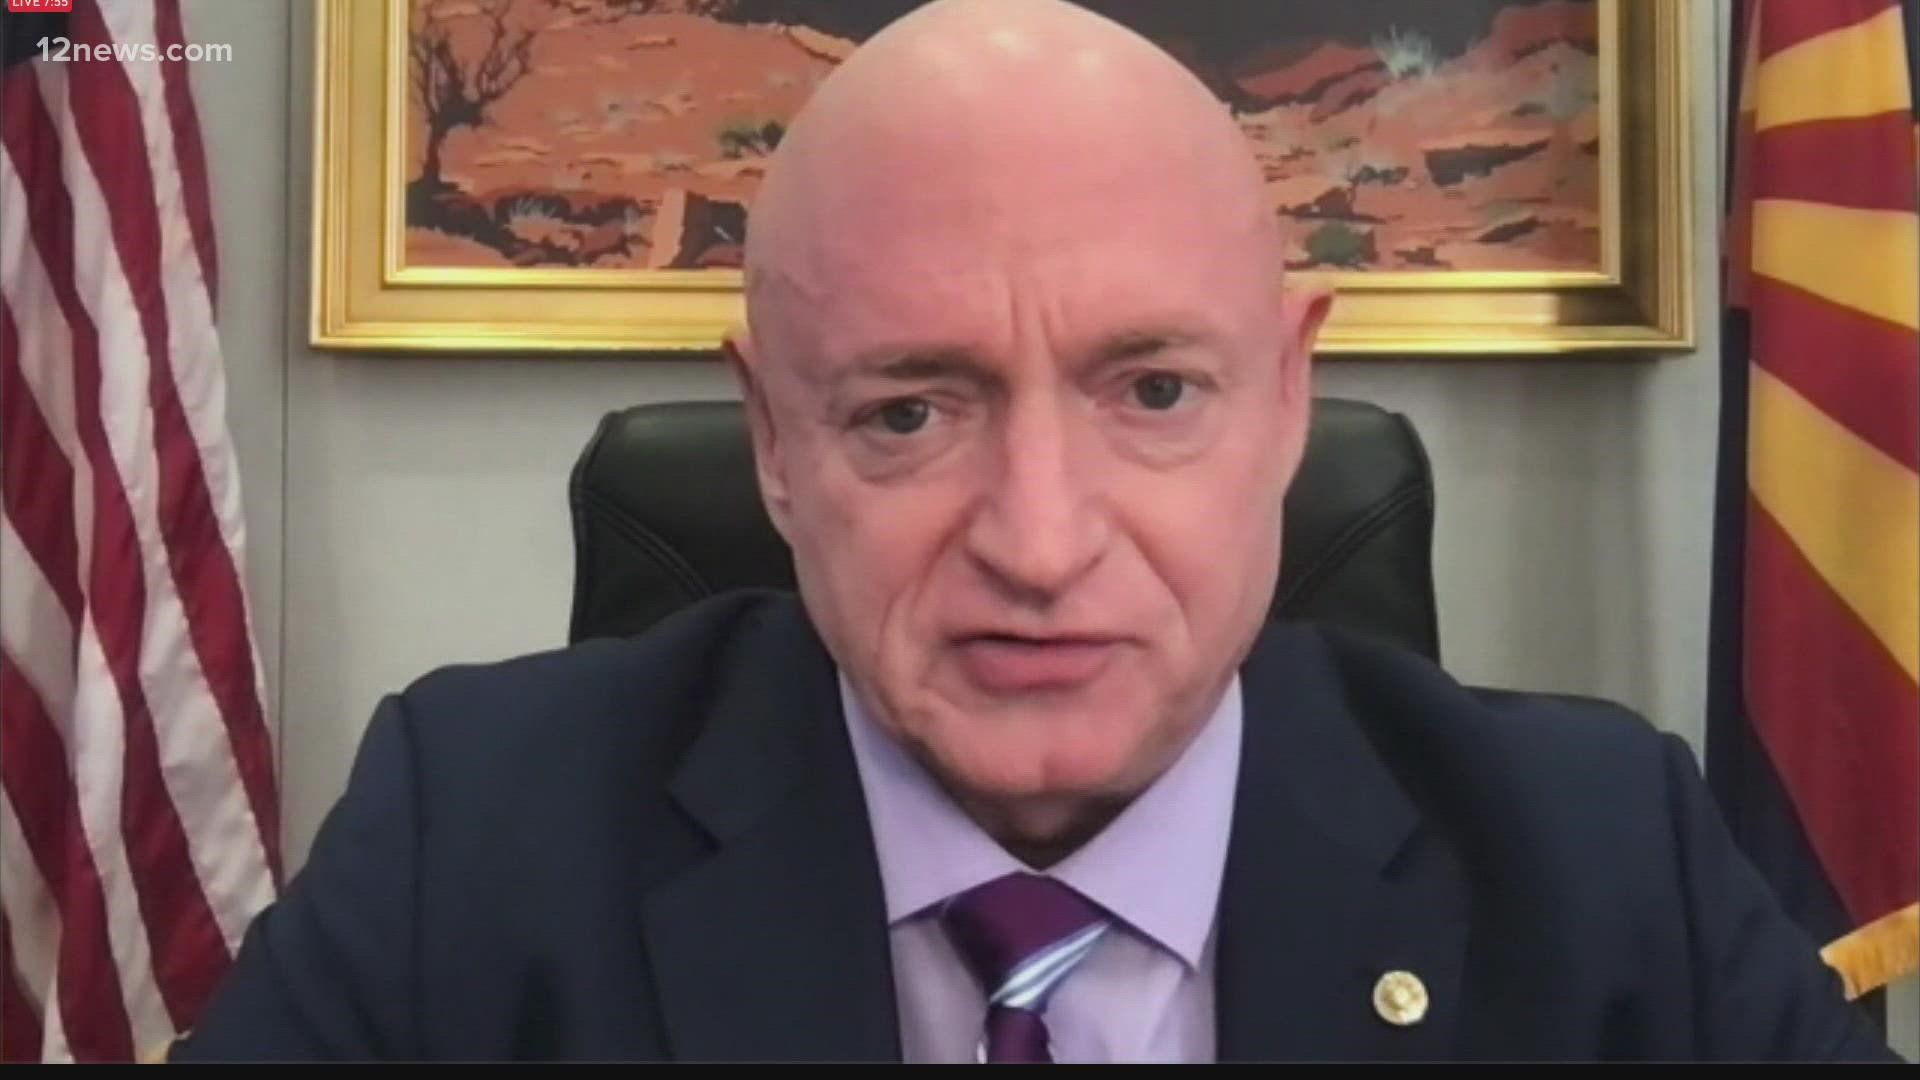 Senator Mark Kelly signed a deal that would lower prescription drug prices for older Americans. The deal would allow the government to negotiate prices.